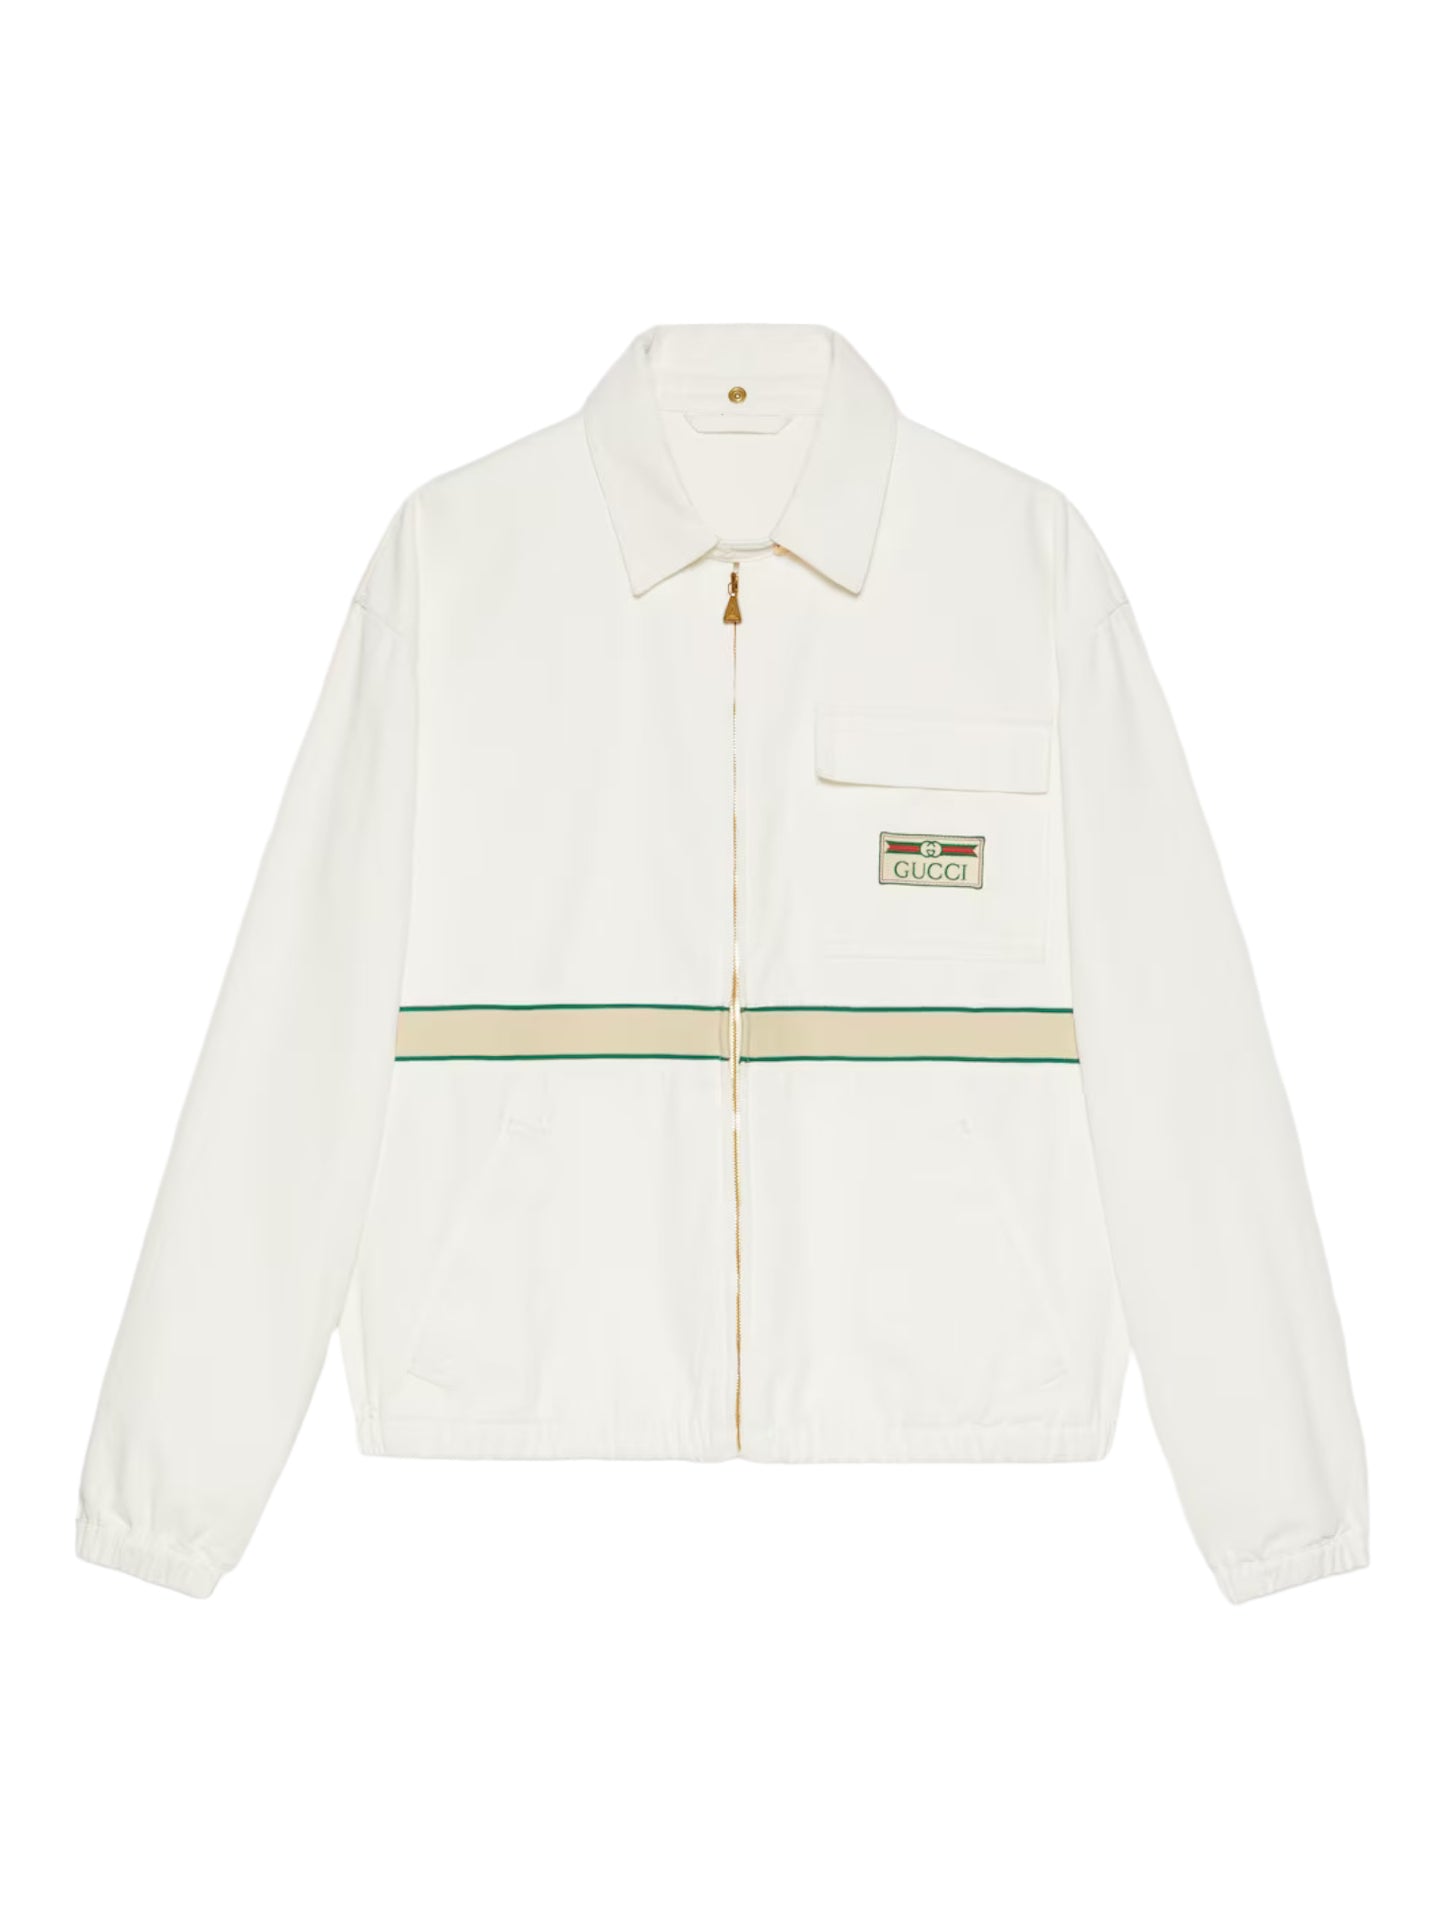 Gucci White Washed Cotton Hooded Zip Jacket With Vintage Label - Genuine Design Luxury Consignment for Men. New & Pre-Owned Clothing, Shoes, & Accessories. Calgary, Canada